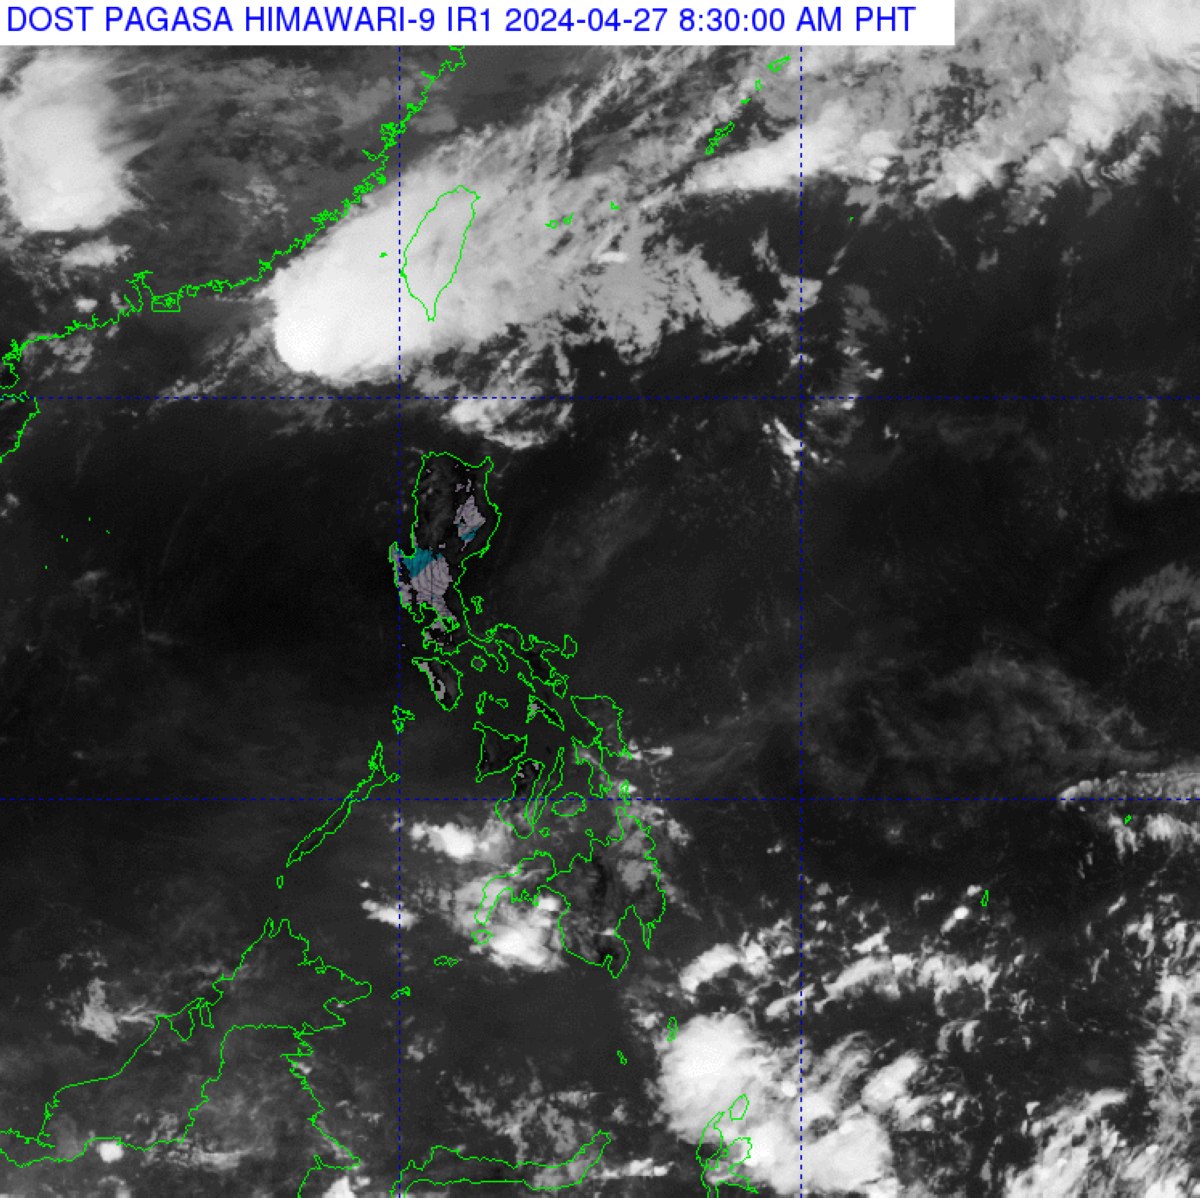 cloudy saturday in ph, with isolated rainshowers — pagasa